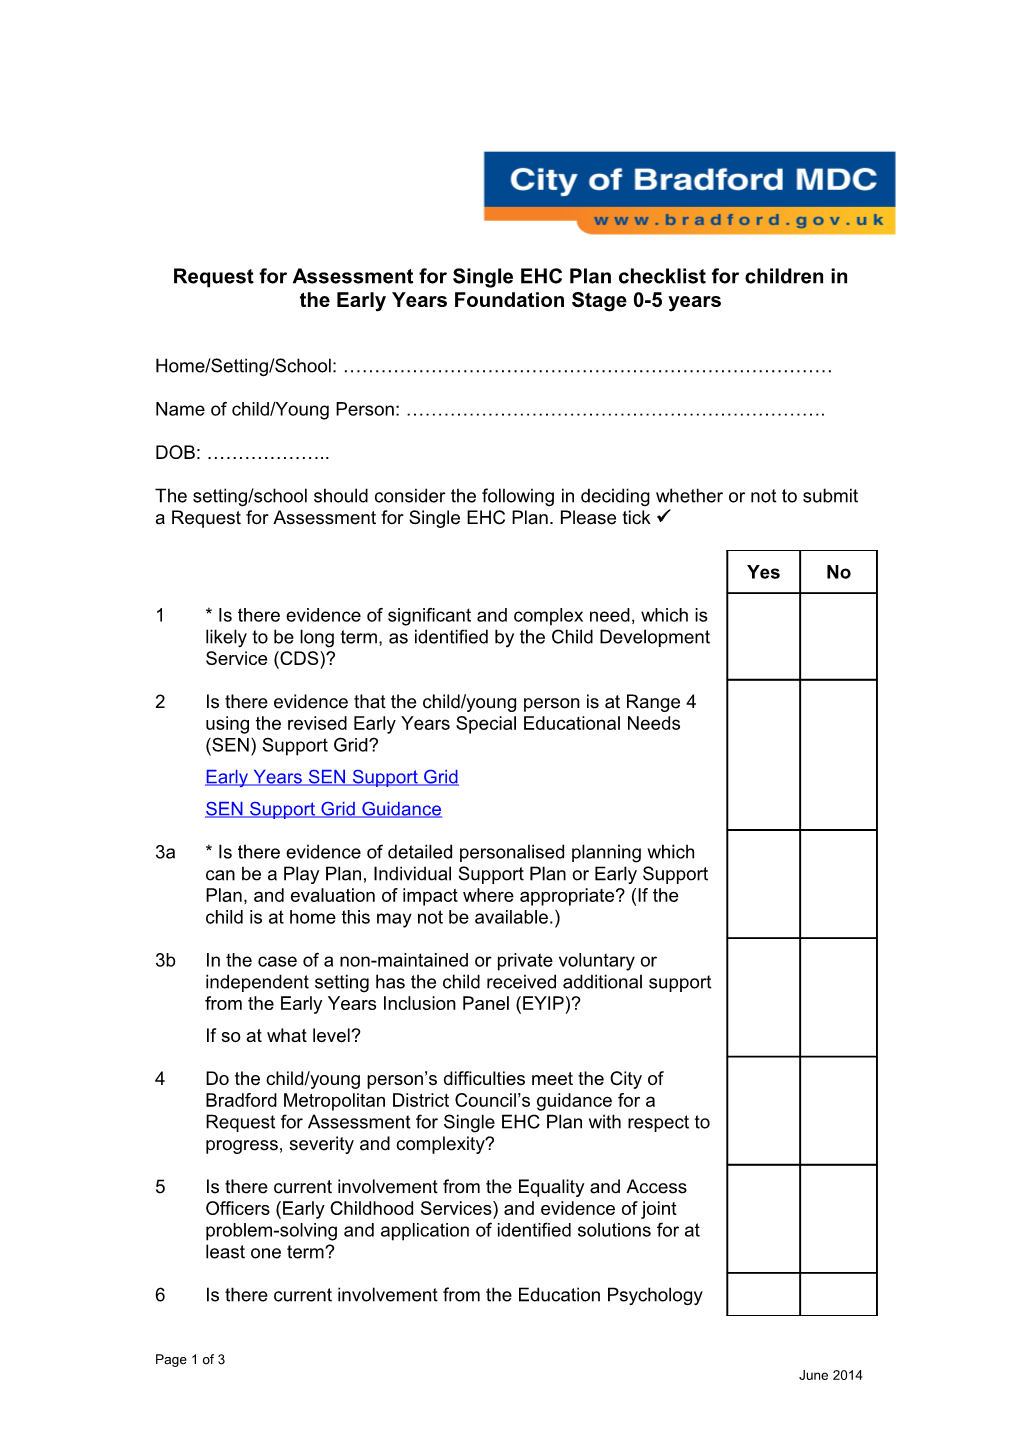 Request for Assessment for Single EHC Plan Checklist for Children in the Early Years Foundation